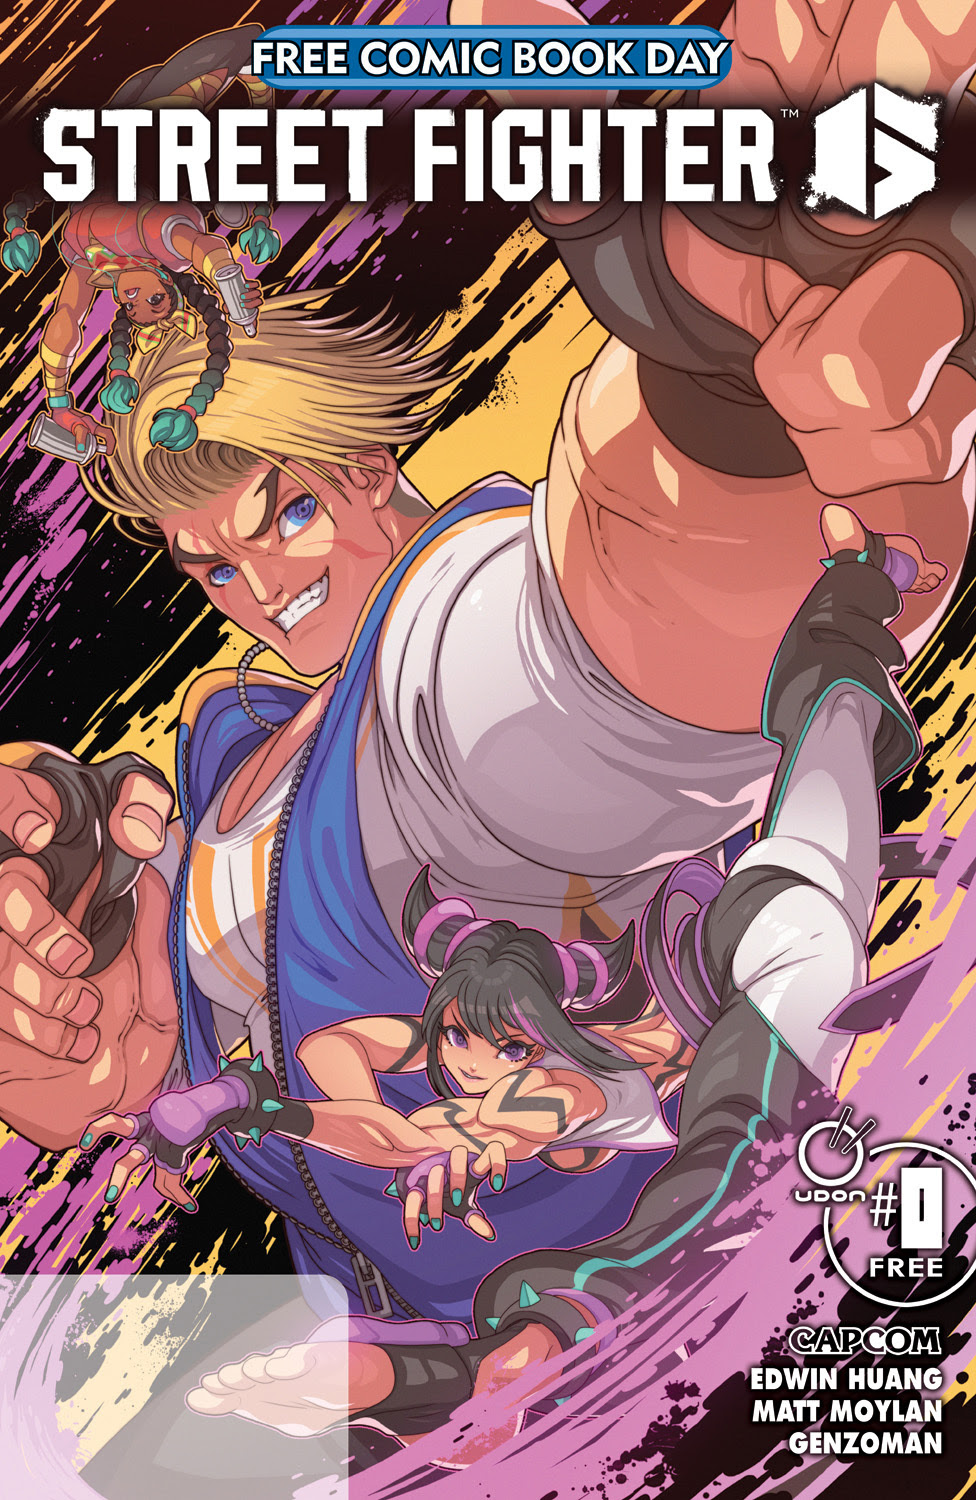 Street Fighter Compendium - Book One Coming Soon!, street fighter duel vega  